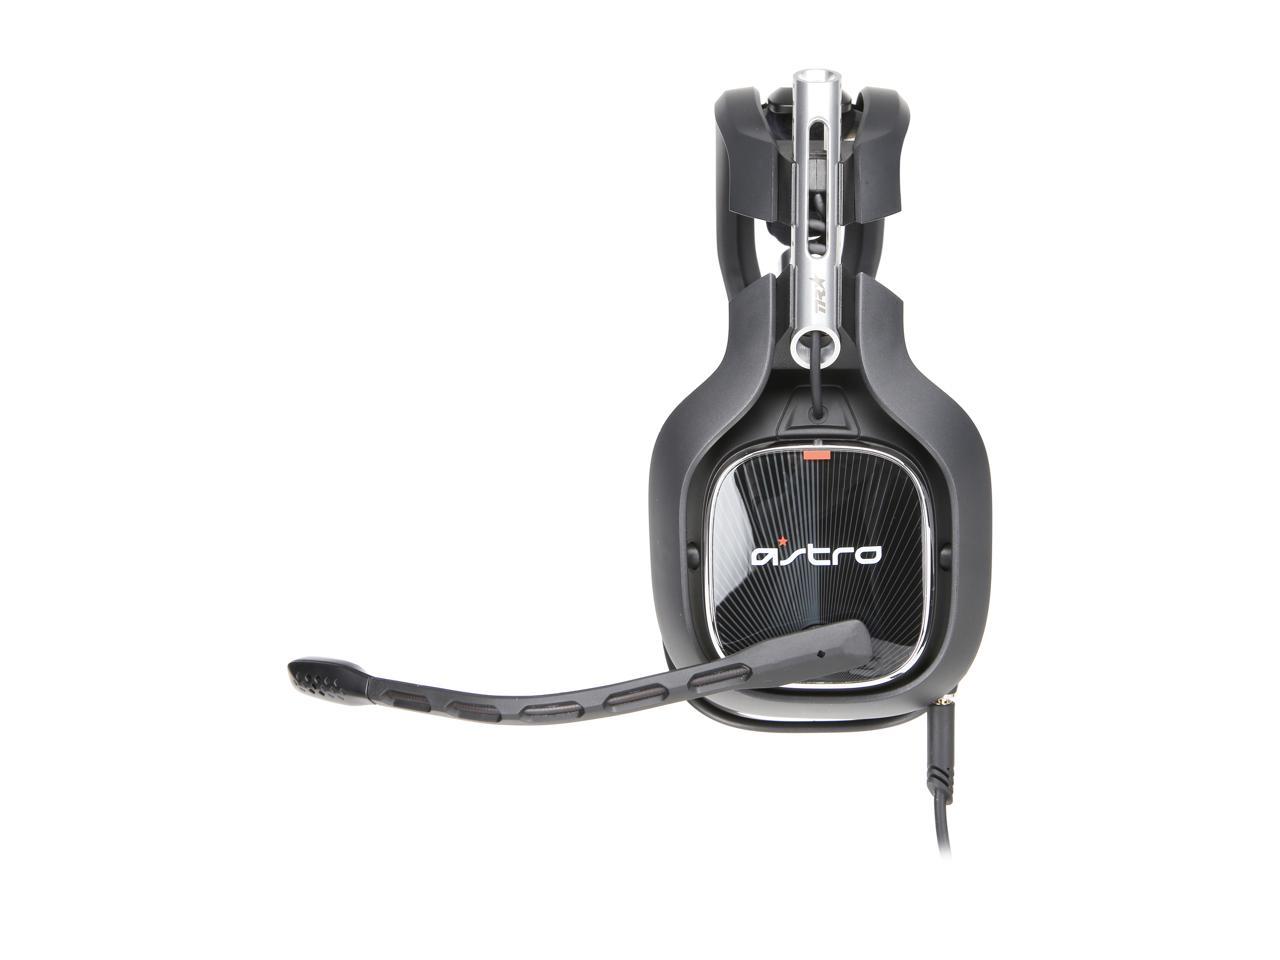 ASTRO A40 TR Gaming Headset